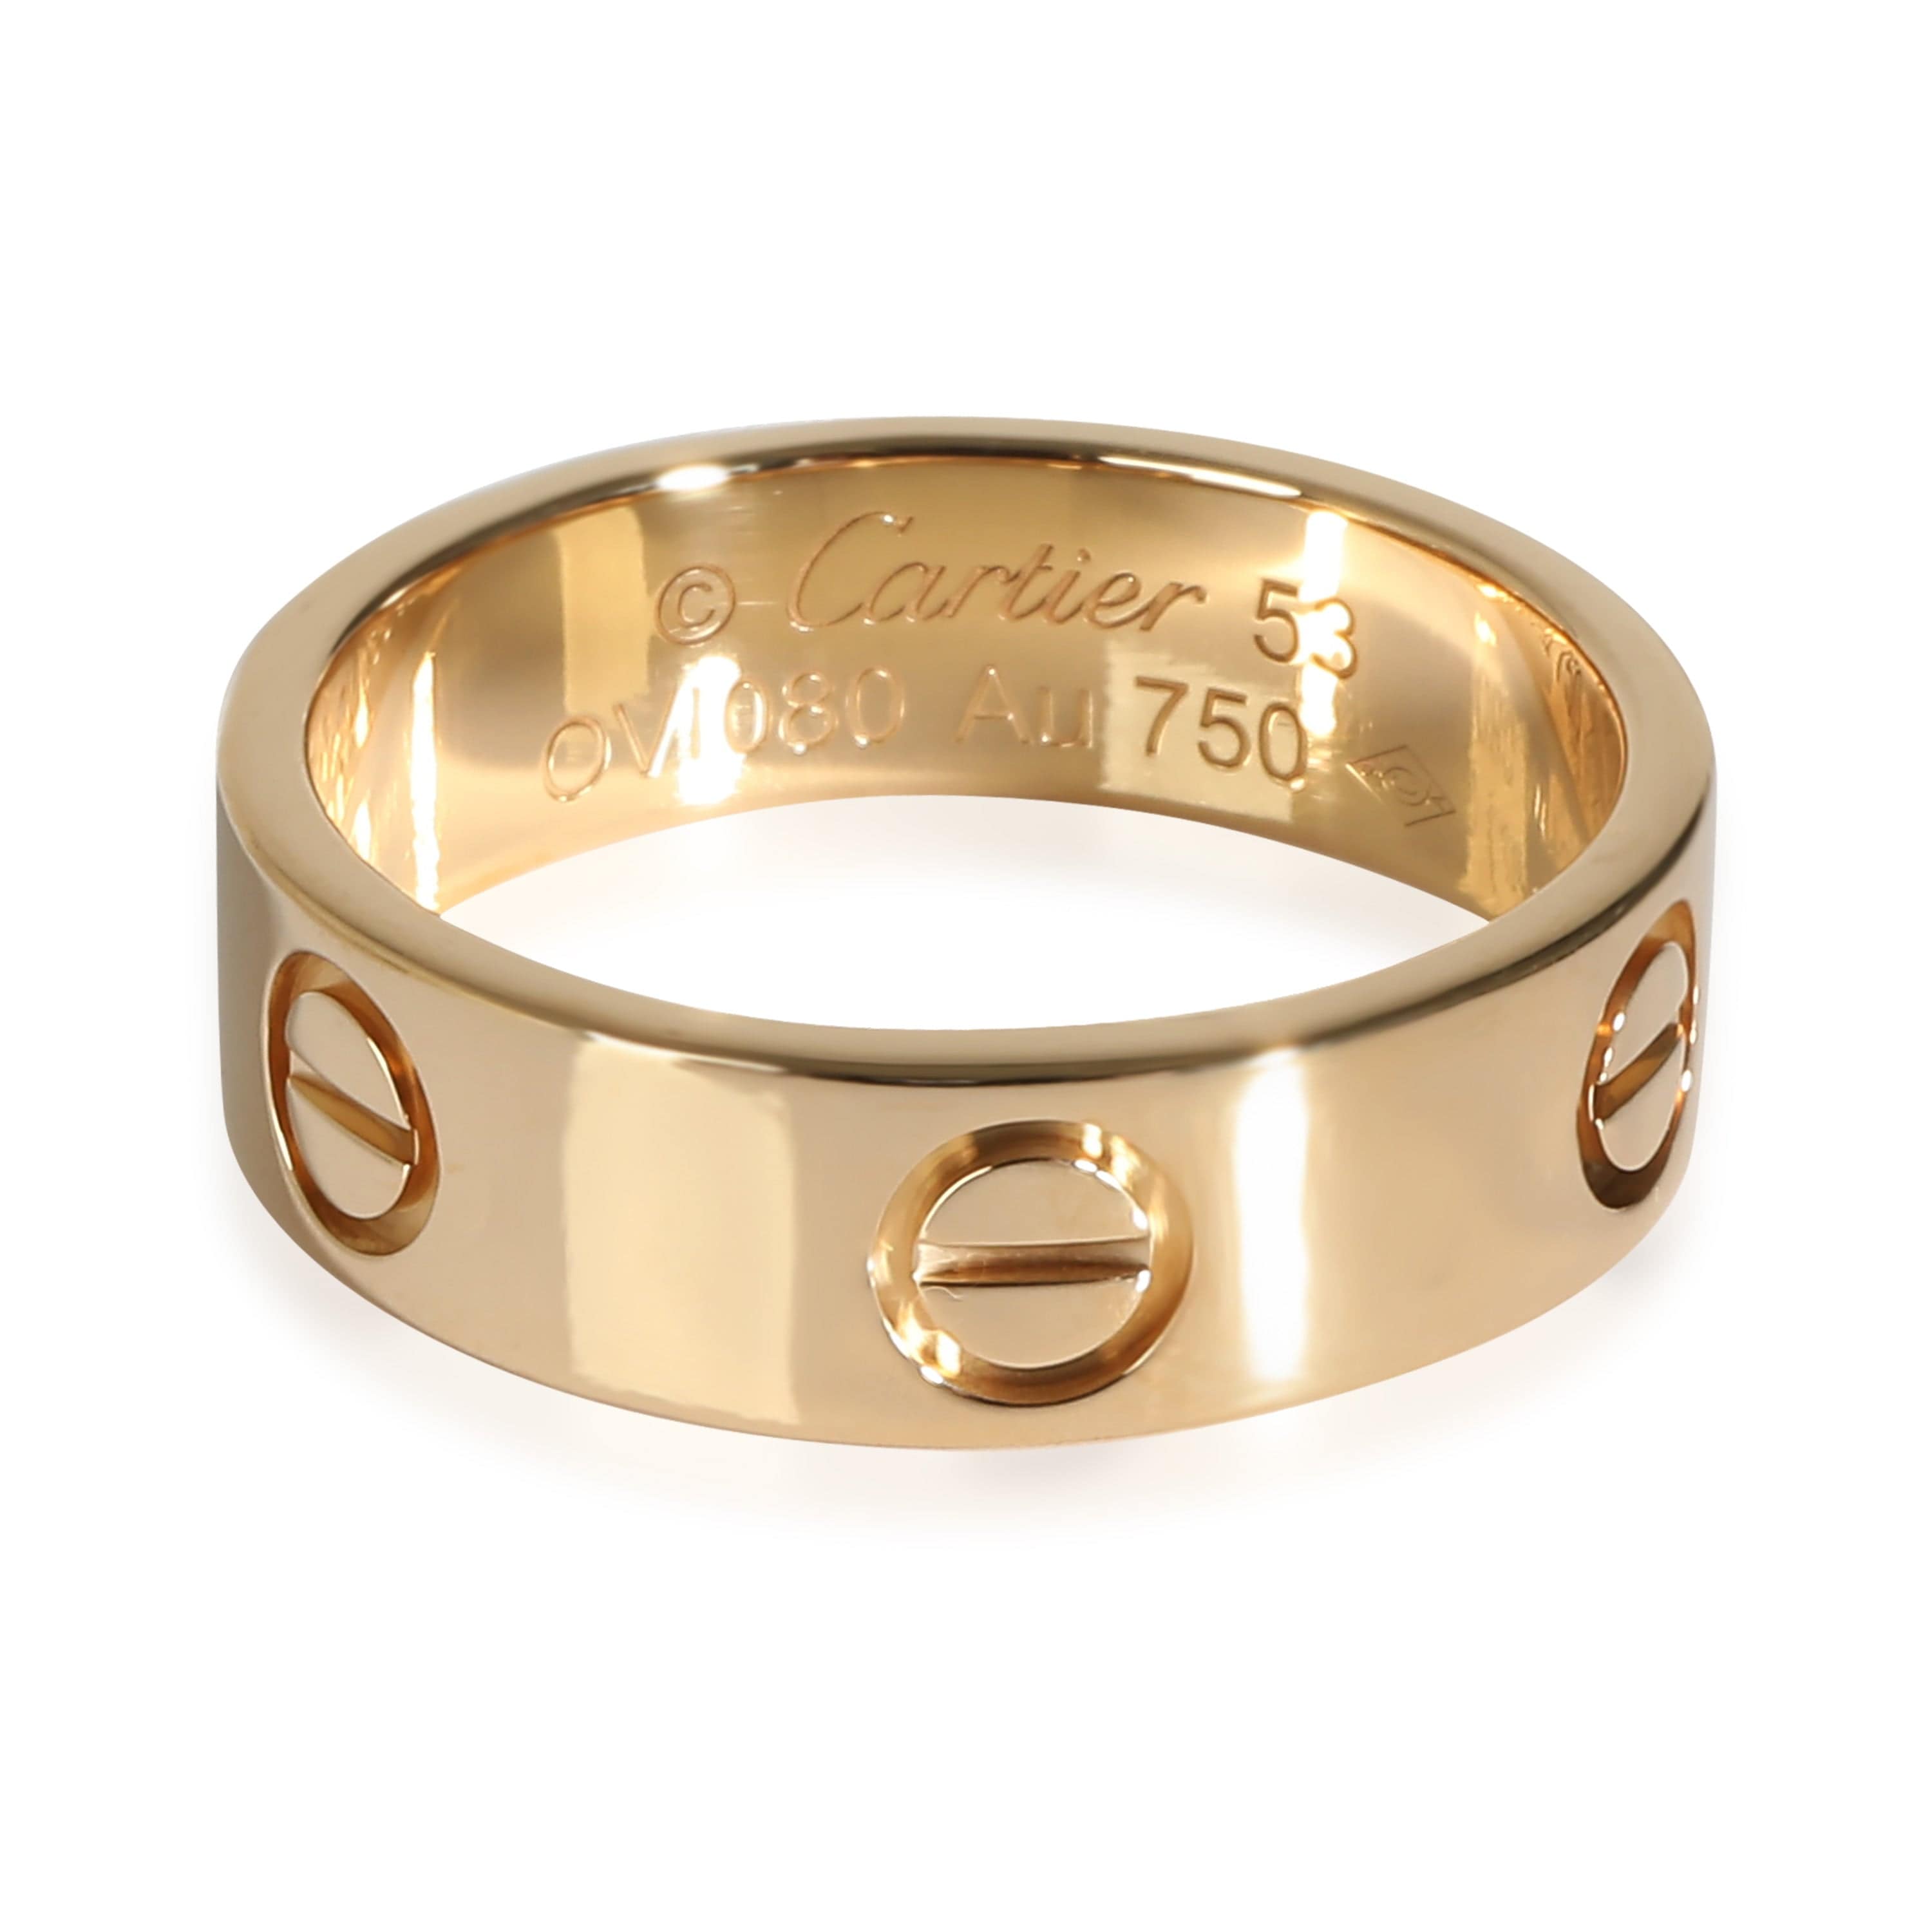 Cartier Cartier Love Ring in 18k Yellow Gold